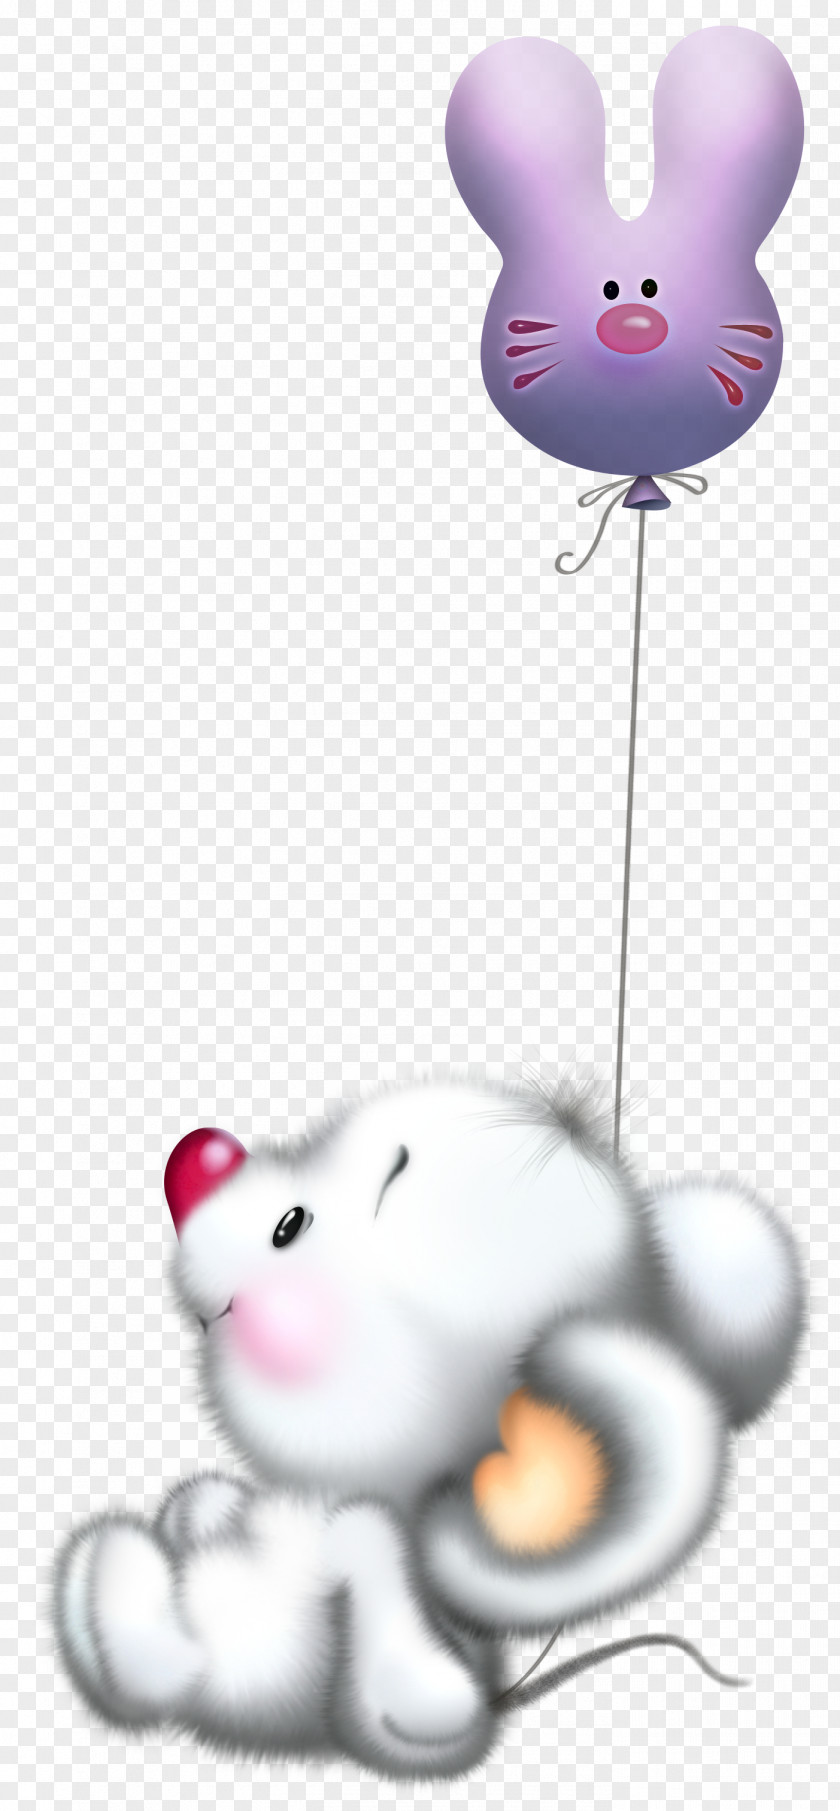 Cute White Mouse With Balloon Cartoon Free Clipart Computer Clip Art PNG